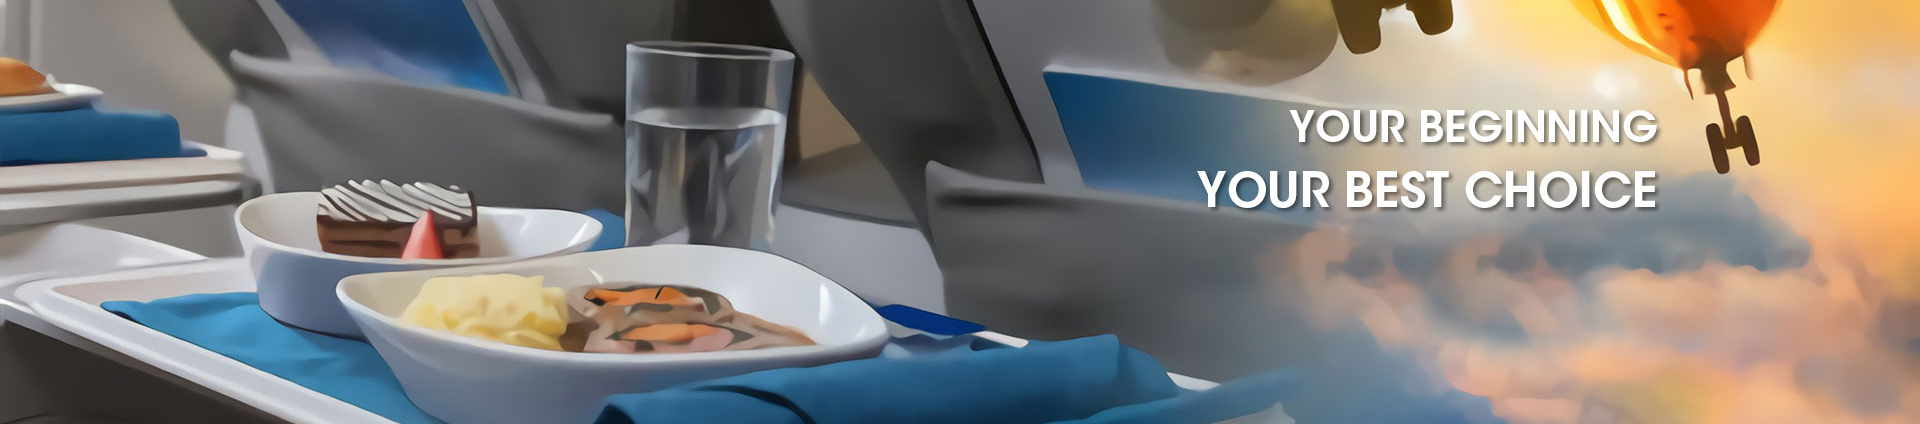 Airline Eco friendly Rotable Tableware